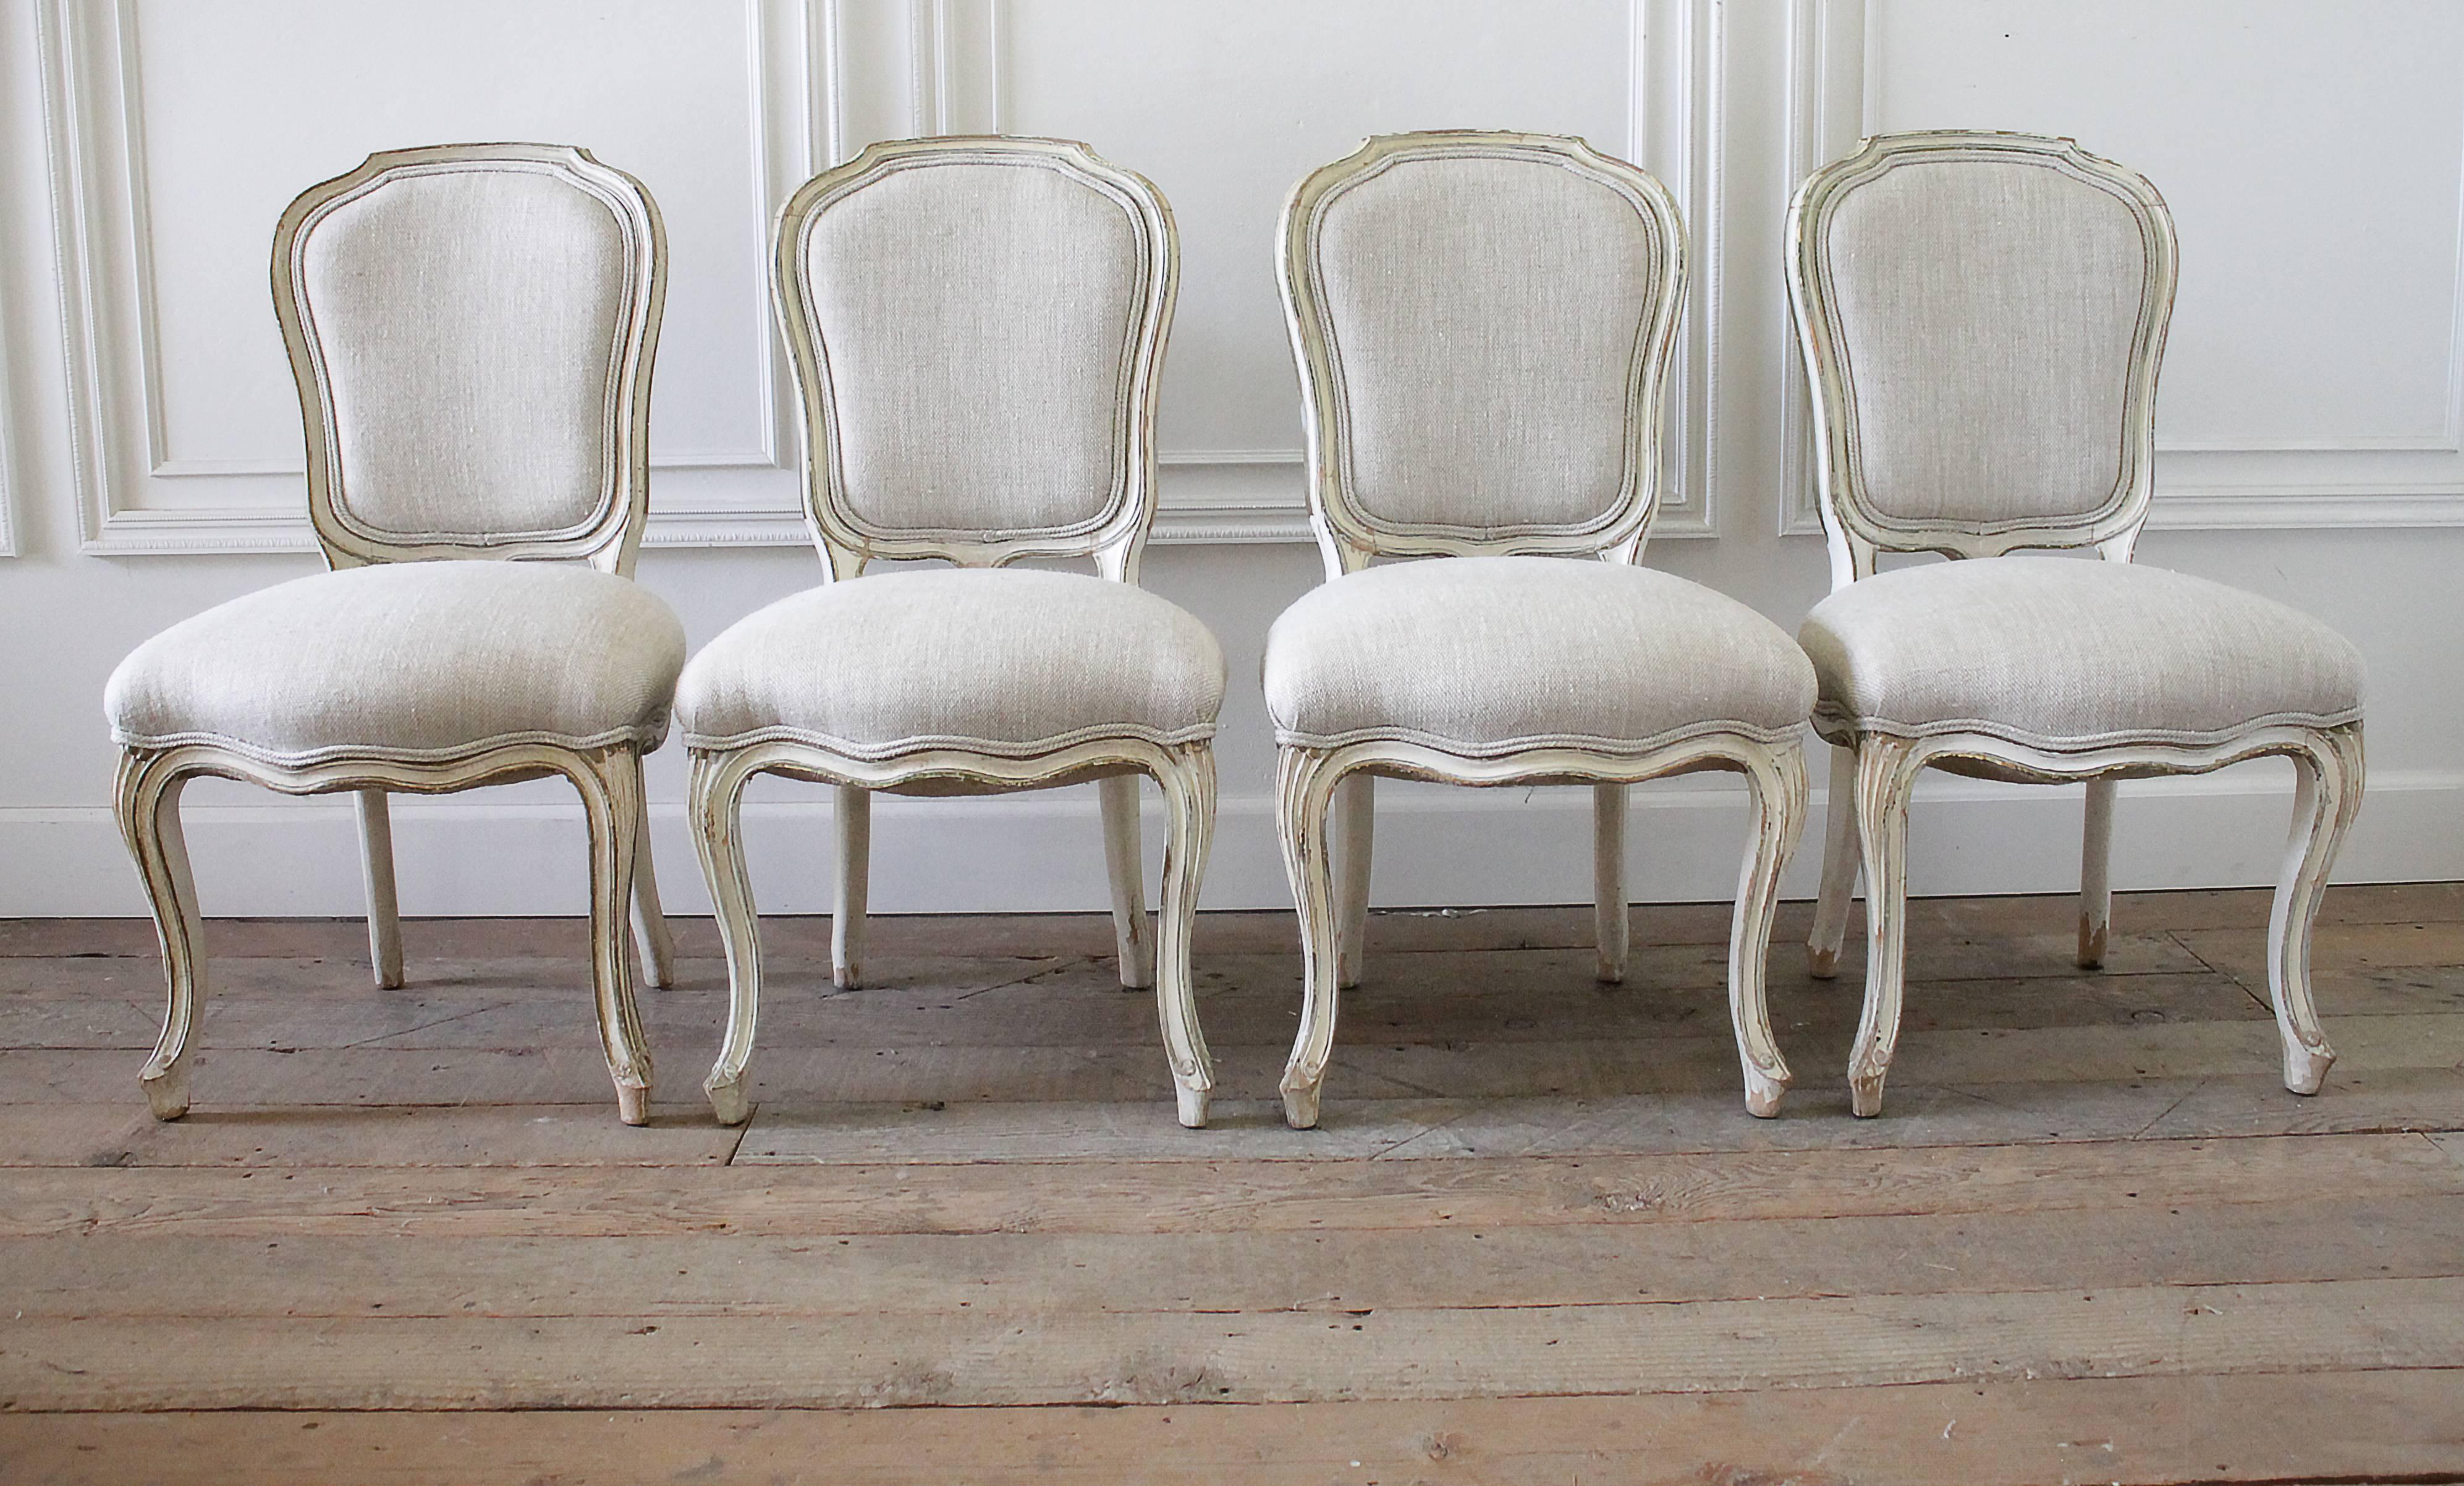 Fabulous set of painted dining chairs, circa 1940 has been upholstered in a light oatmeal Irish Linen. Finished with a burlap back, and double welt edge. The soft creamy color paint is original, and has the most wonderful chippy patina. The edge of